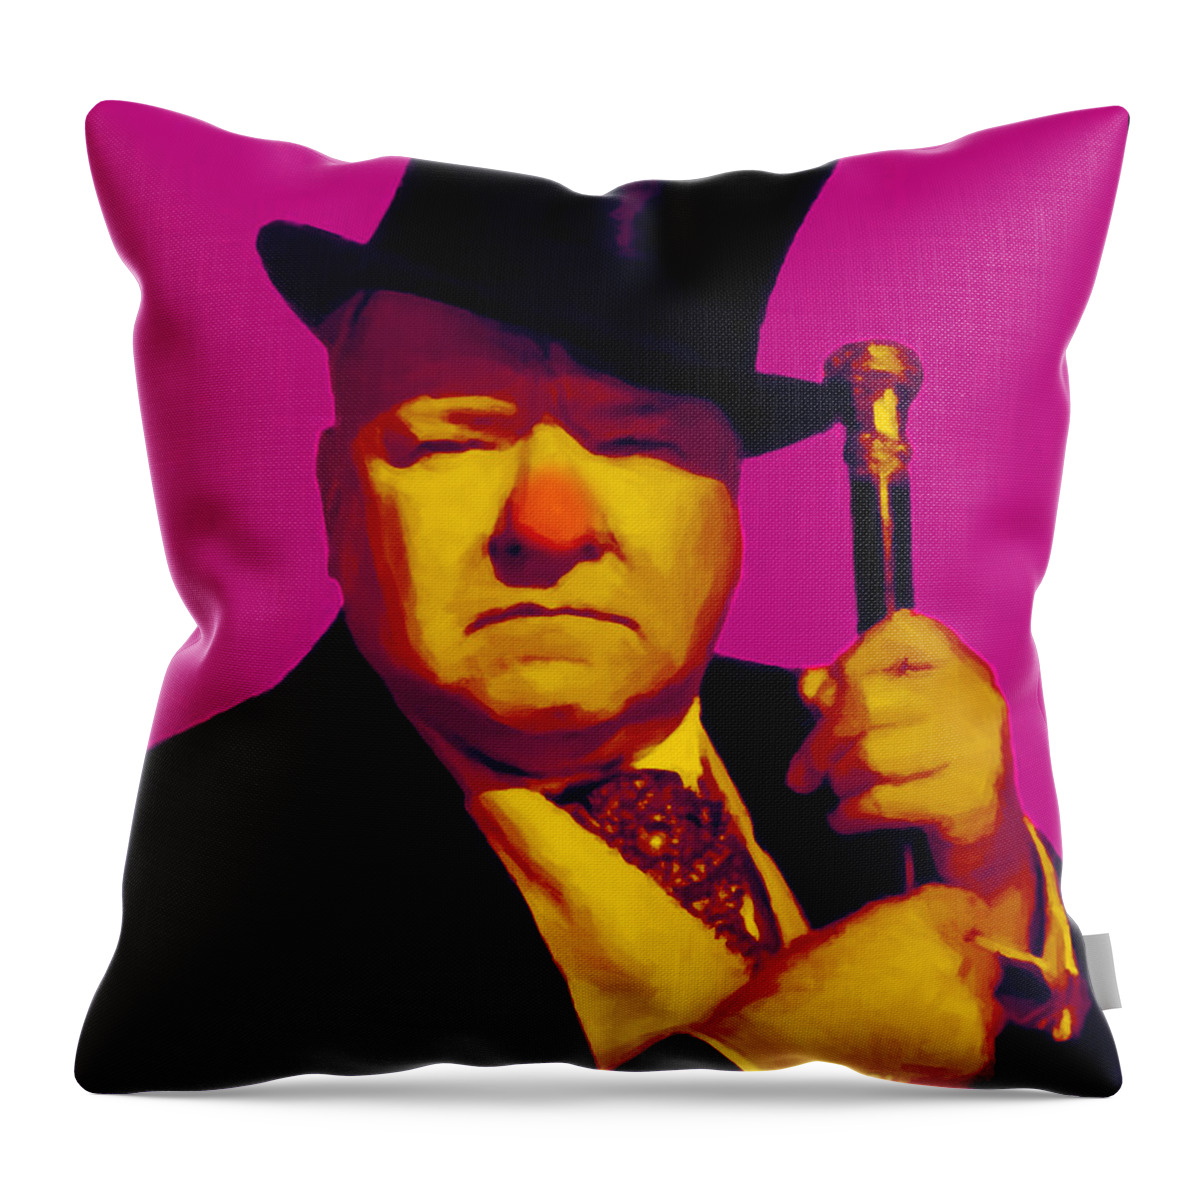 Wc Fields Throw Pillow featuring the photograph W C Fields 20130217 by Wingsdomain Art and Photography